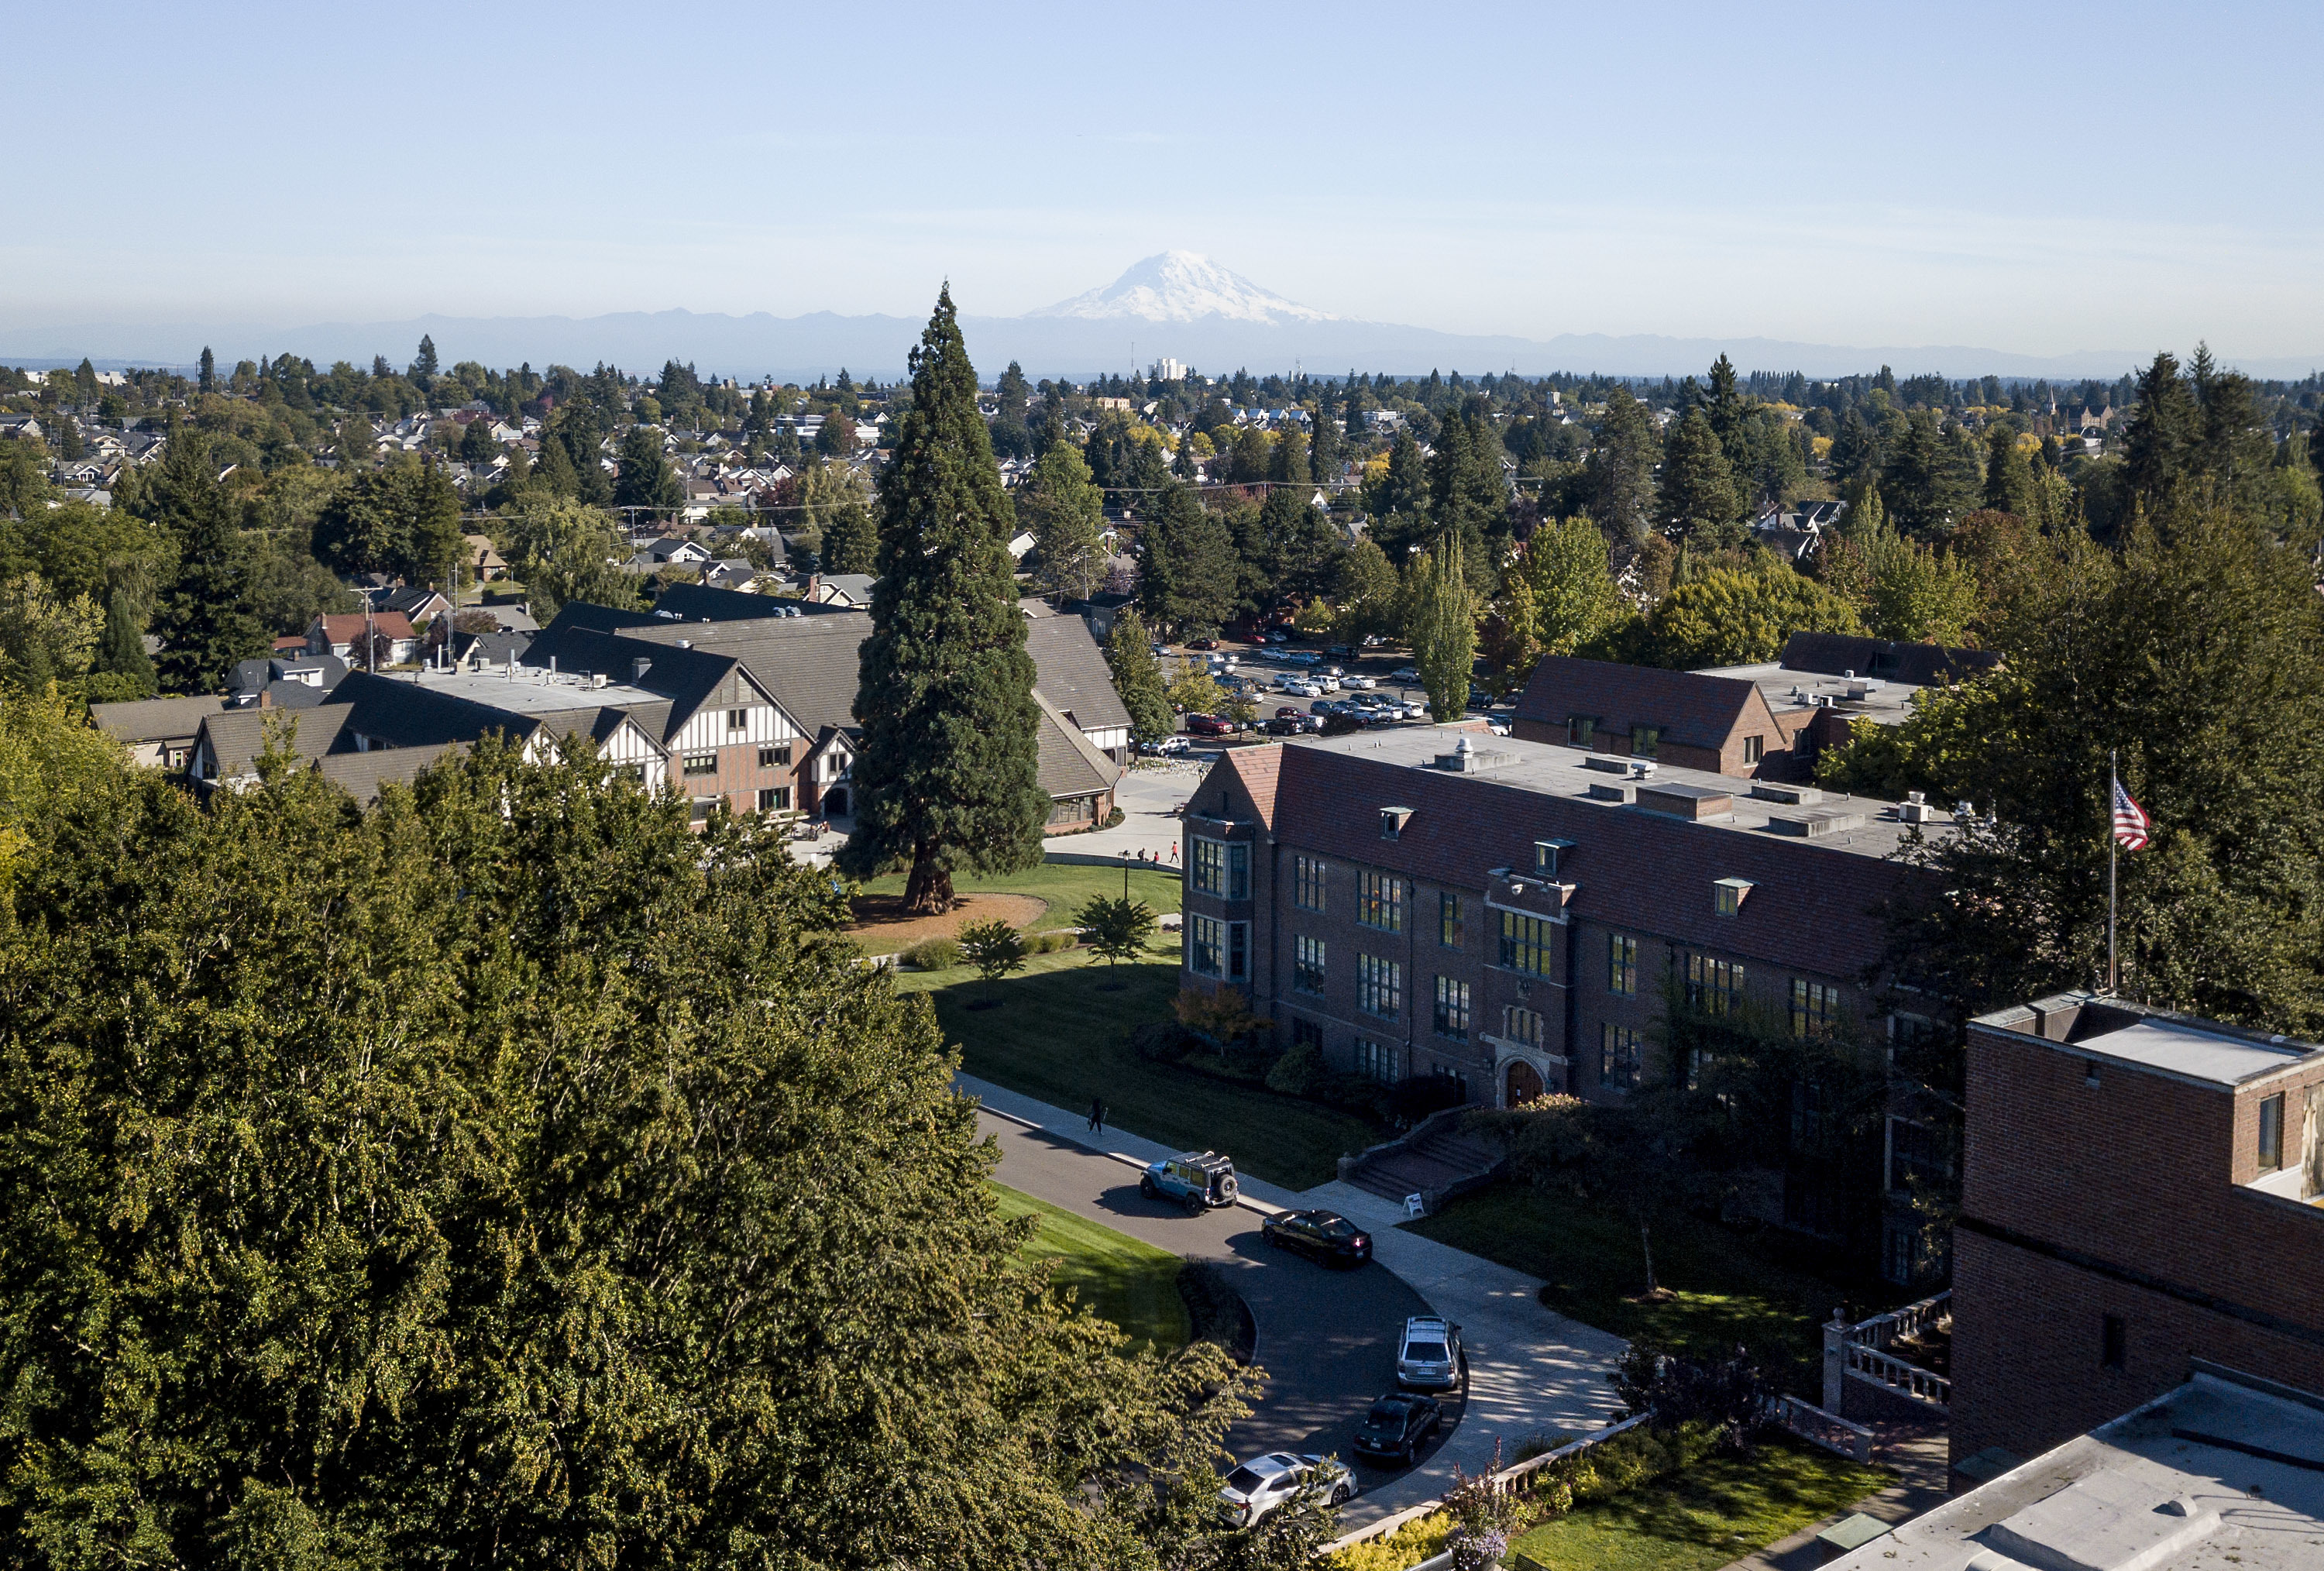 Campus seen from the air, with the giant sequoia in the foreground and Mount Rainier in the distance.